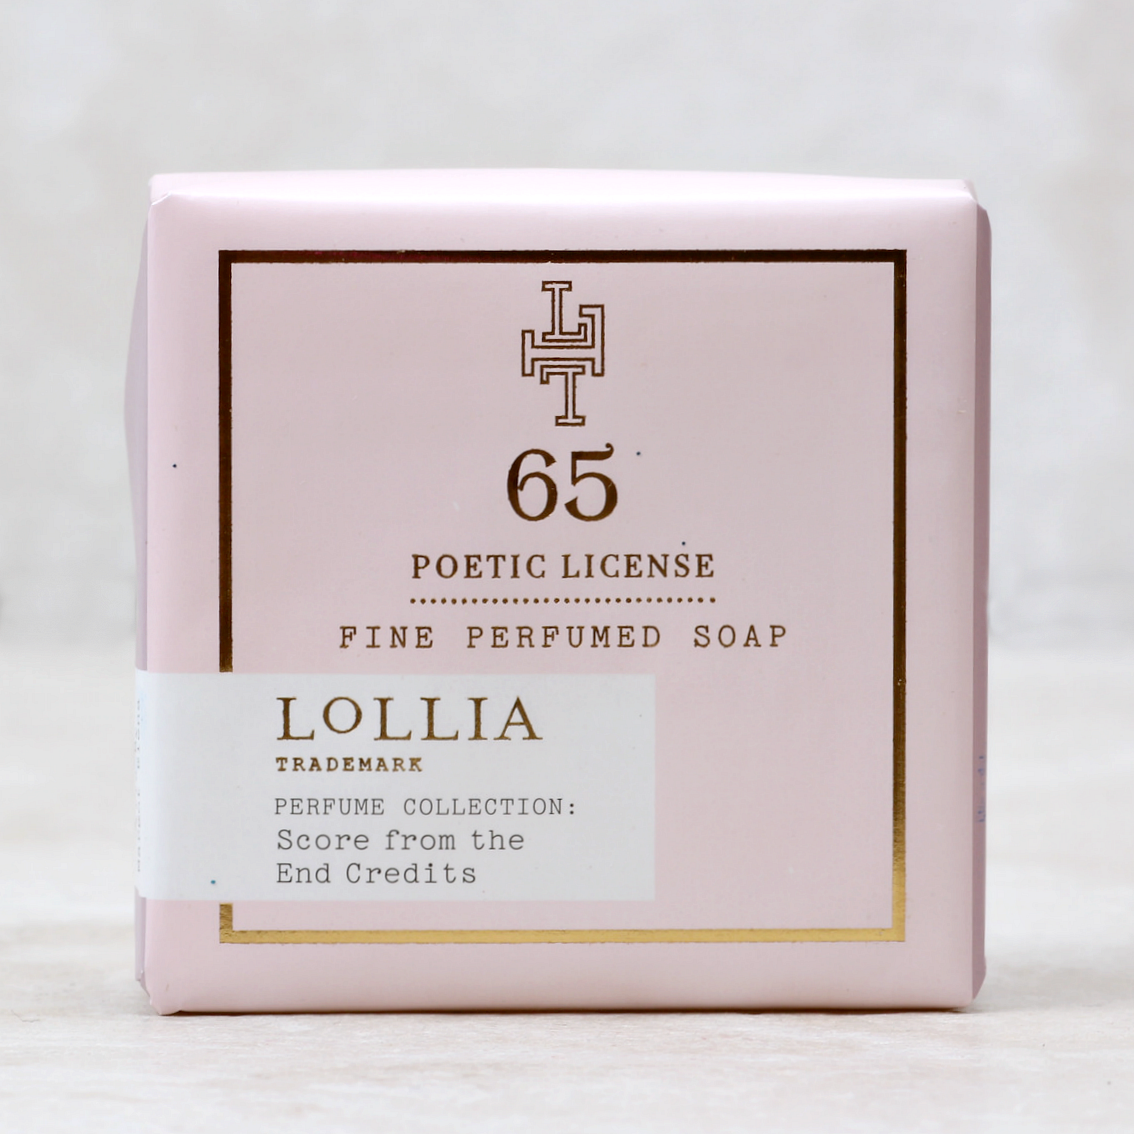 Lollia Poetic License Soap 65 Score From the End Credits